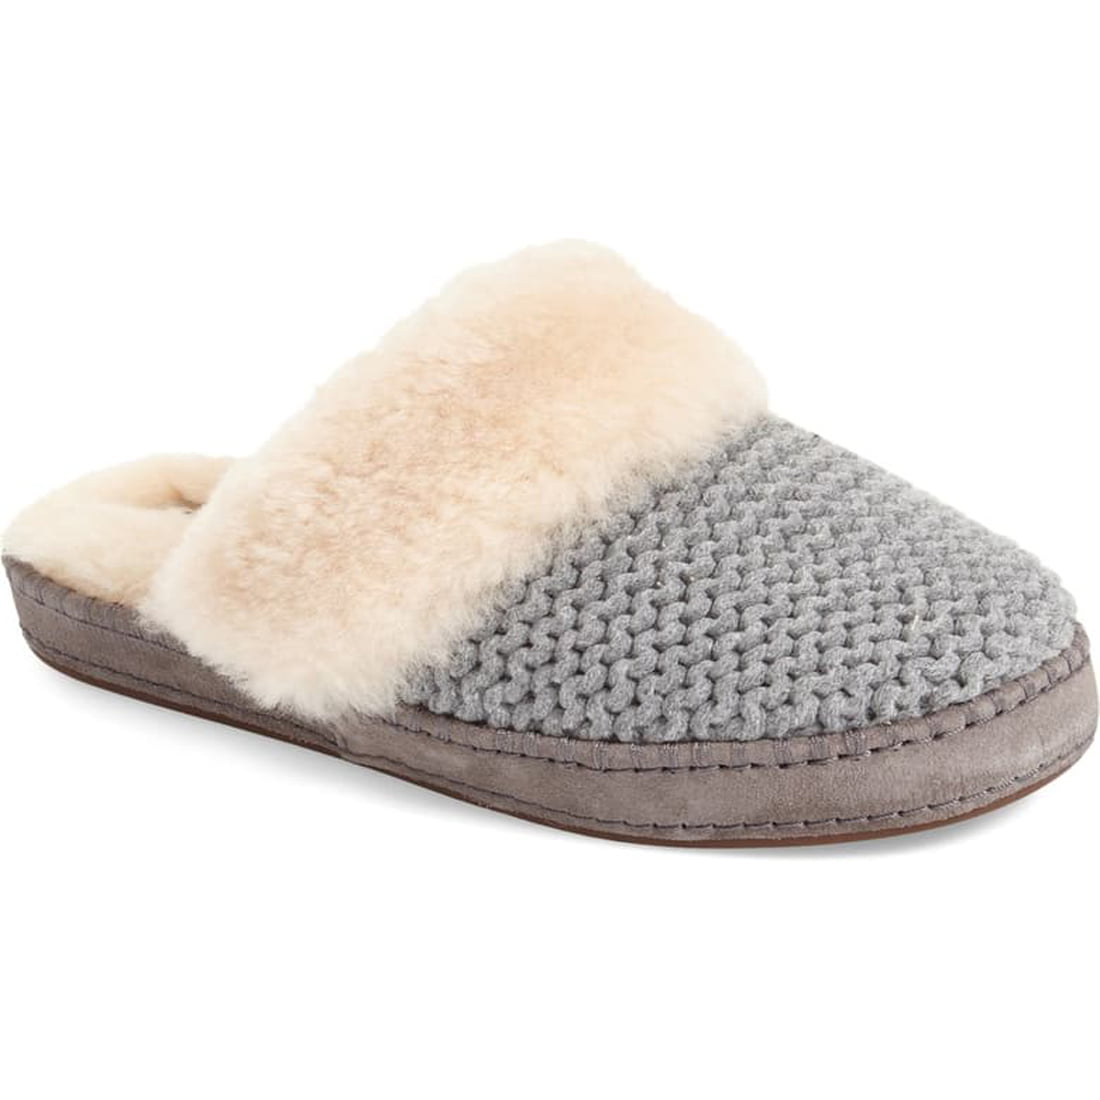 ugg aira knit slippers